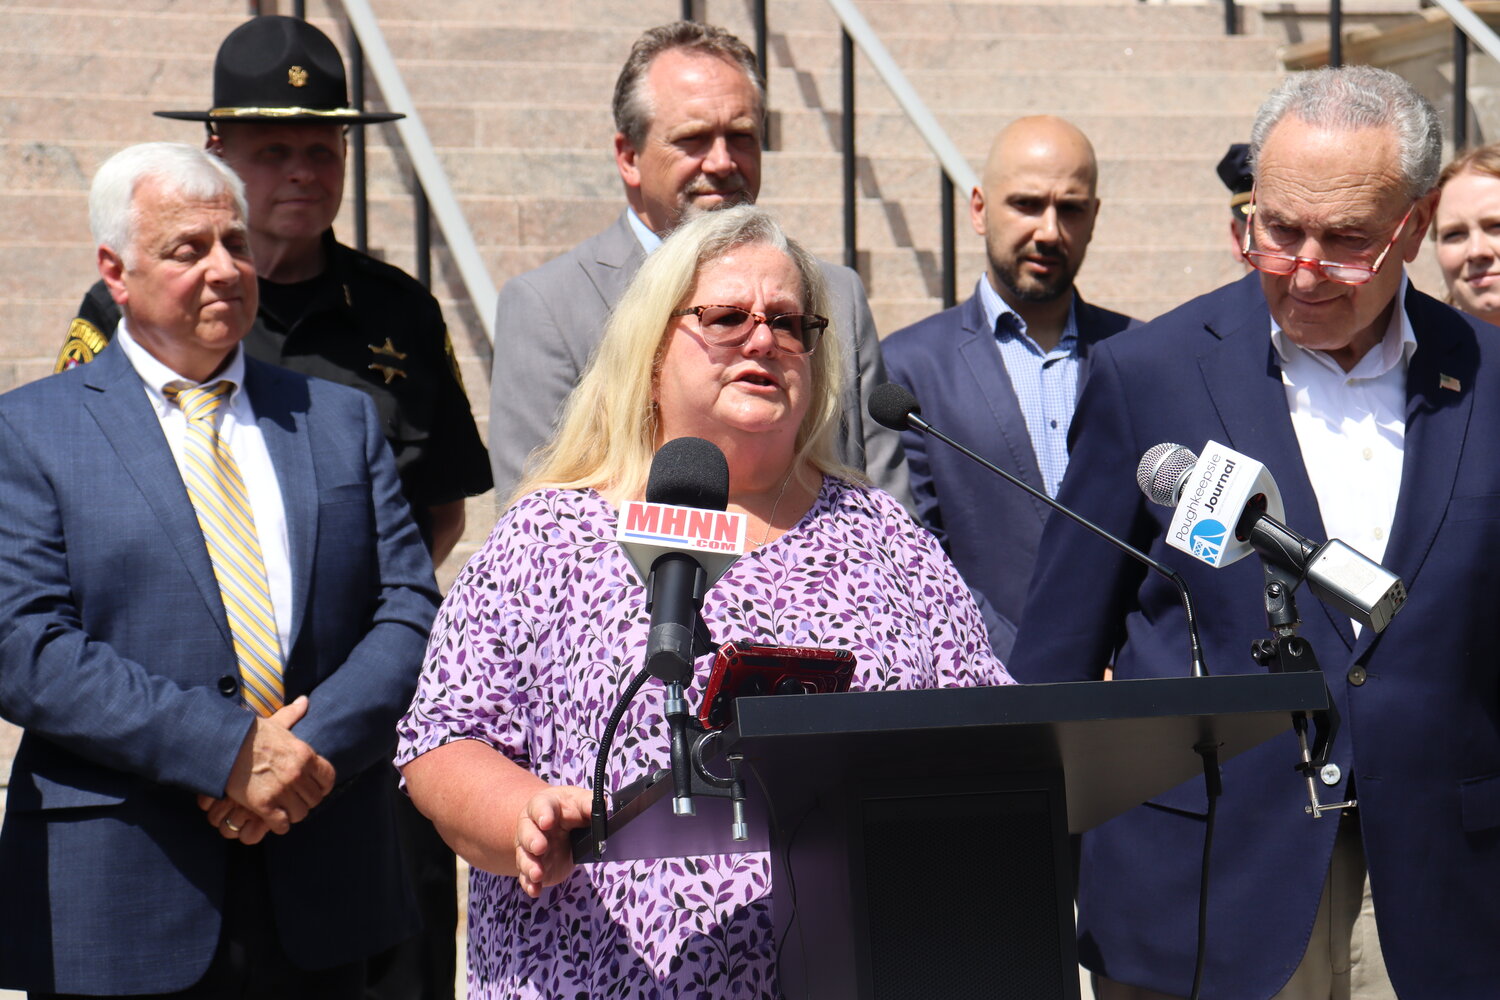 Wendy Brown, former co-chair of the Sullivan County Drug Task Force, speaking at a press conference to announce the county's designation as a High Intensity Drug Trafficking Area.